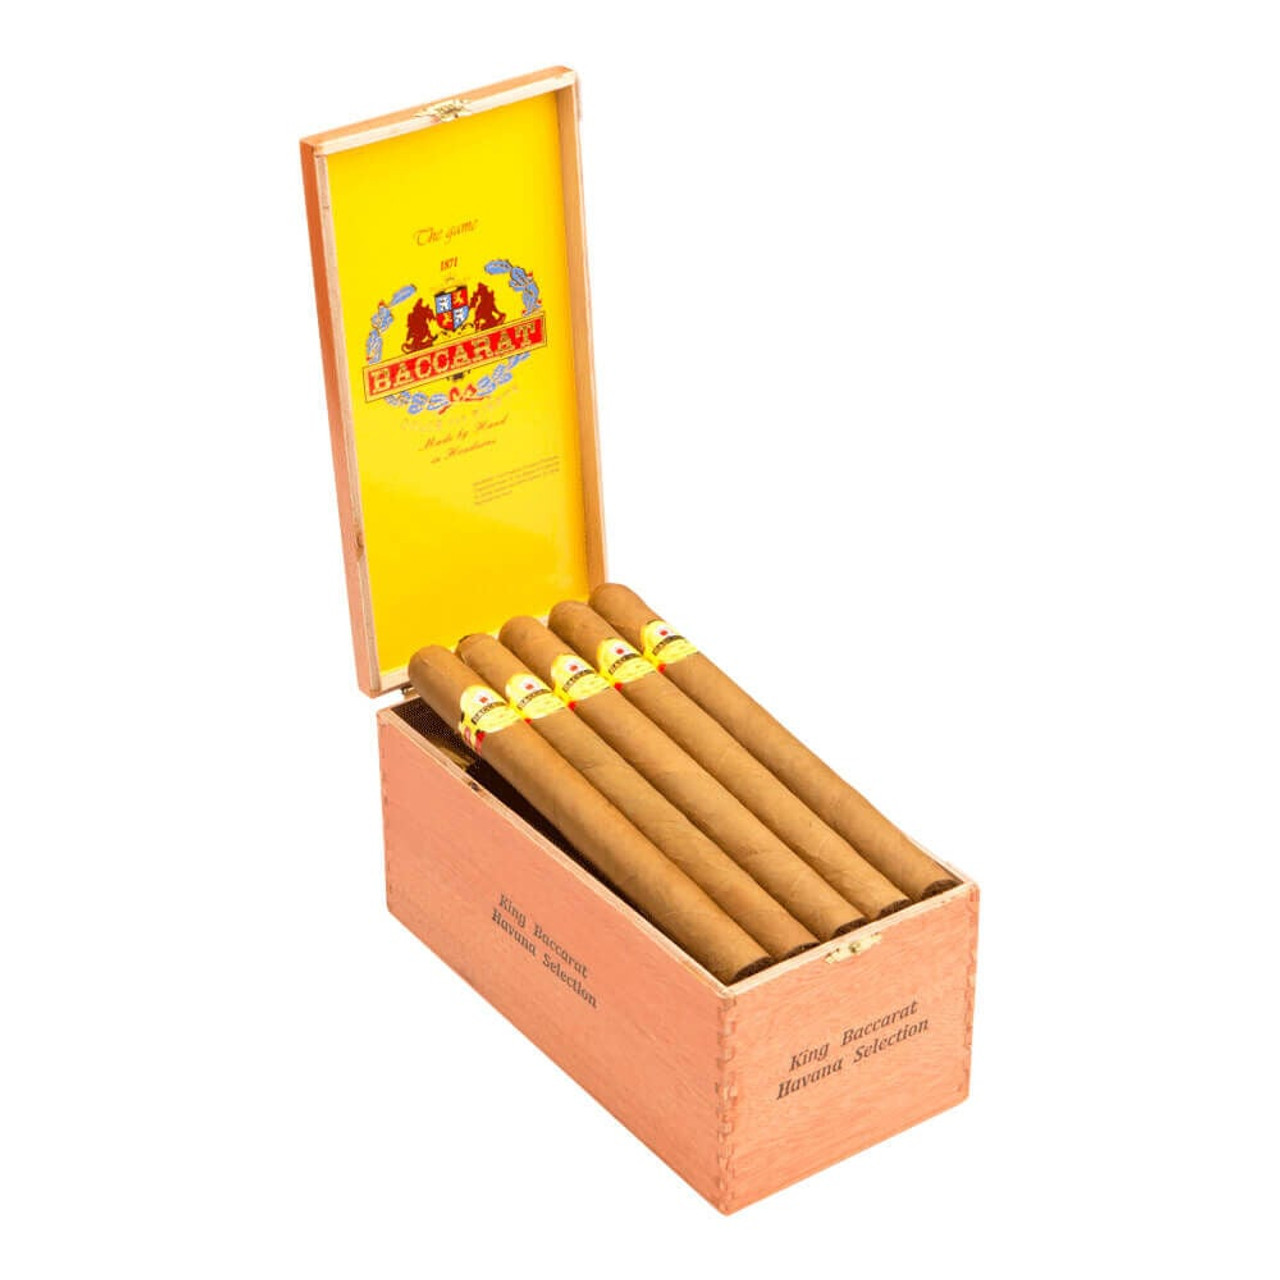 Baccarat Kings Cigars - 8.5 x 52 (Box of 25) Open